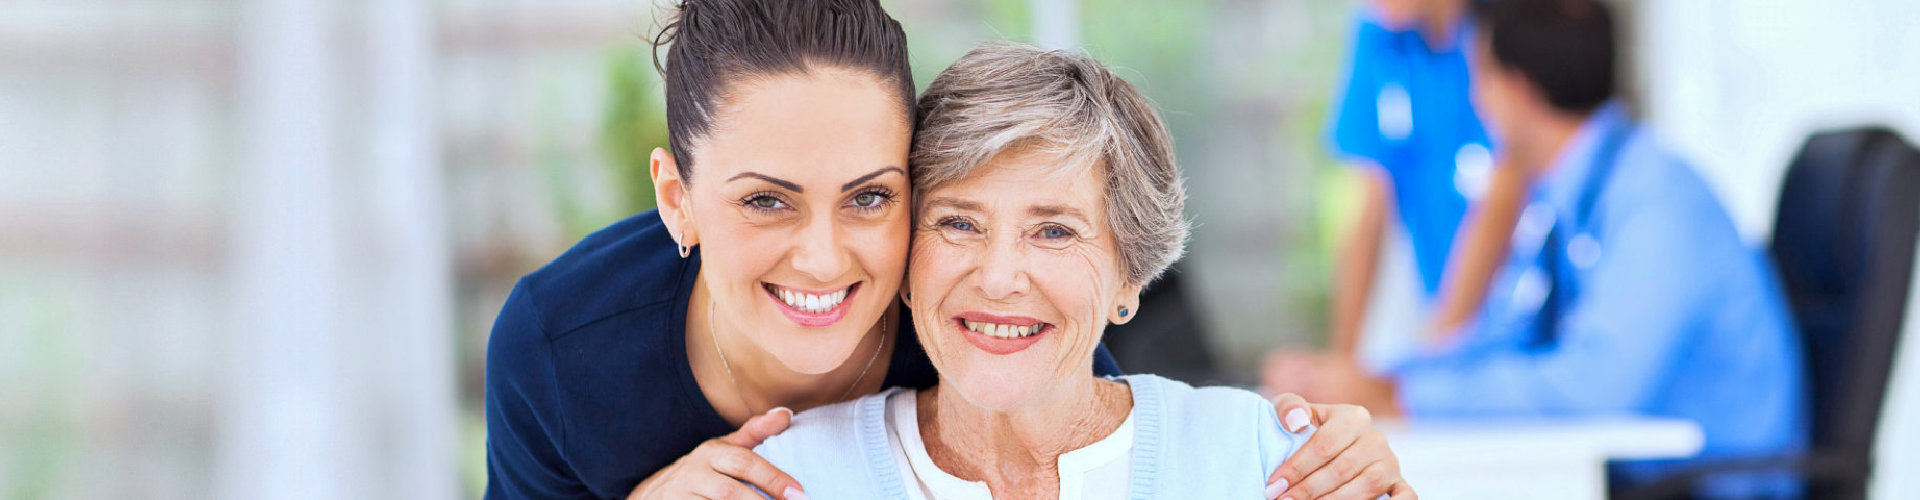 woman and senior smiling